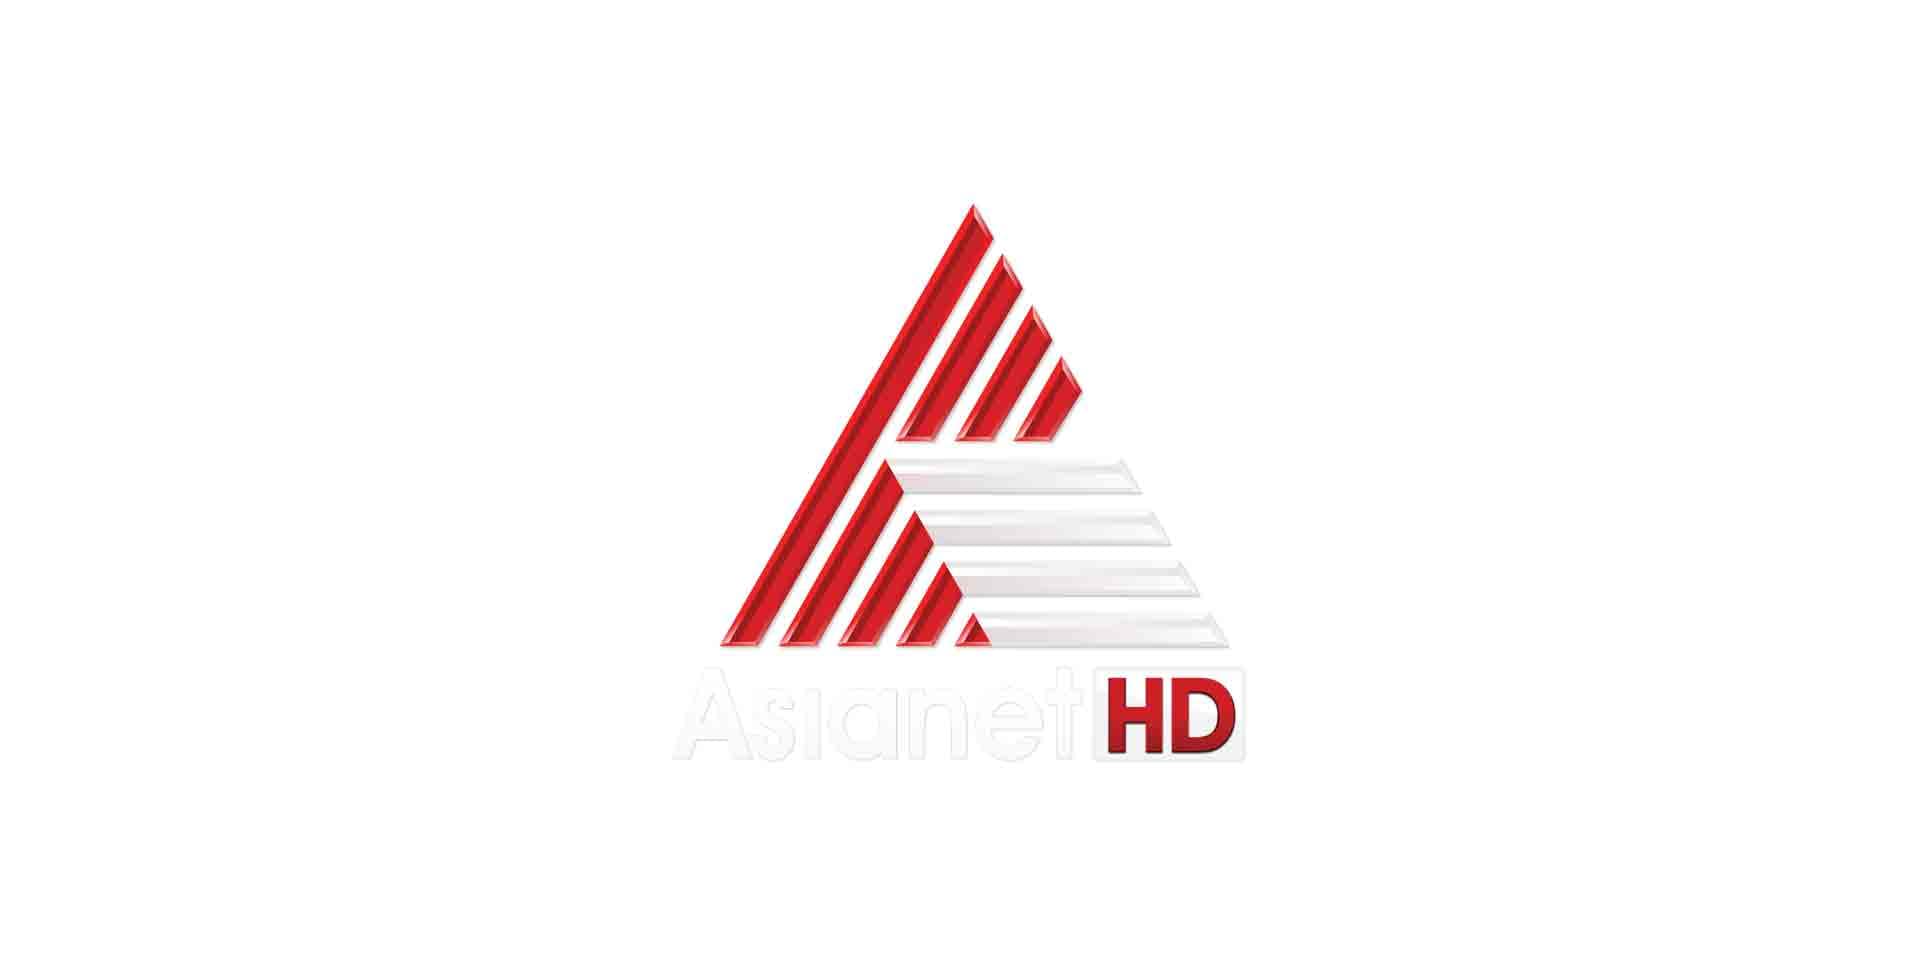 Atrangi TV will be added on Airtel DTH - Journalism Guide